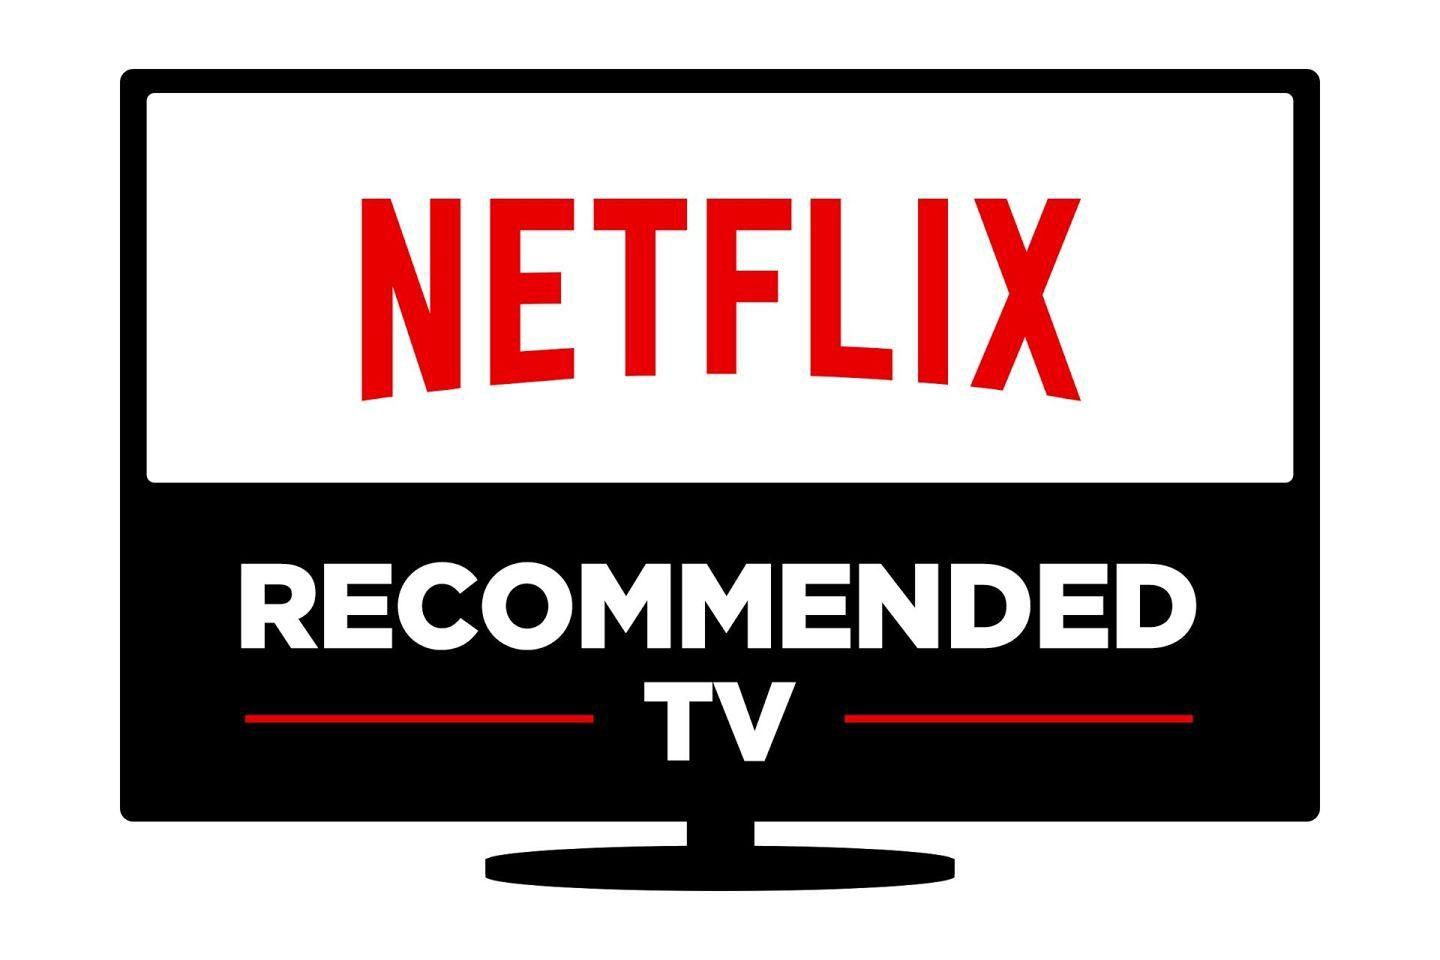 Netflix Max Logo - 2017 Netflix Recommended TVs include all 2017 Sony 4K models